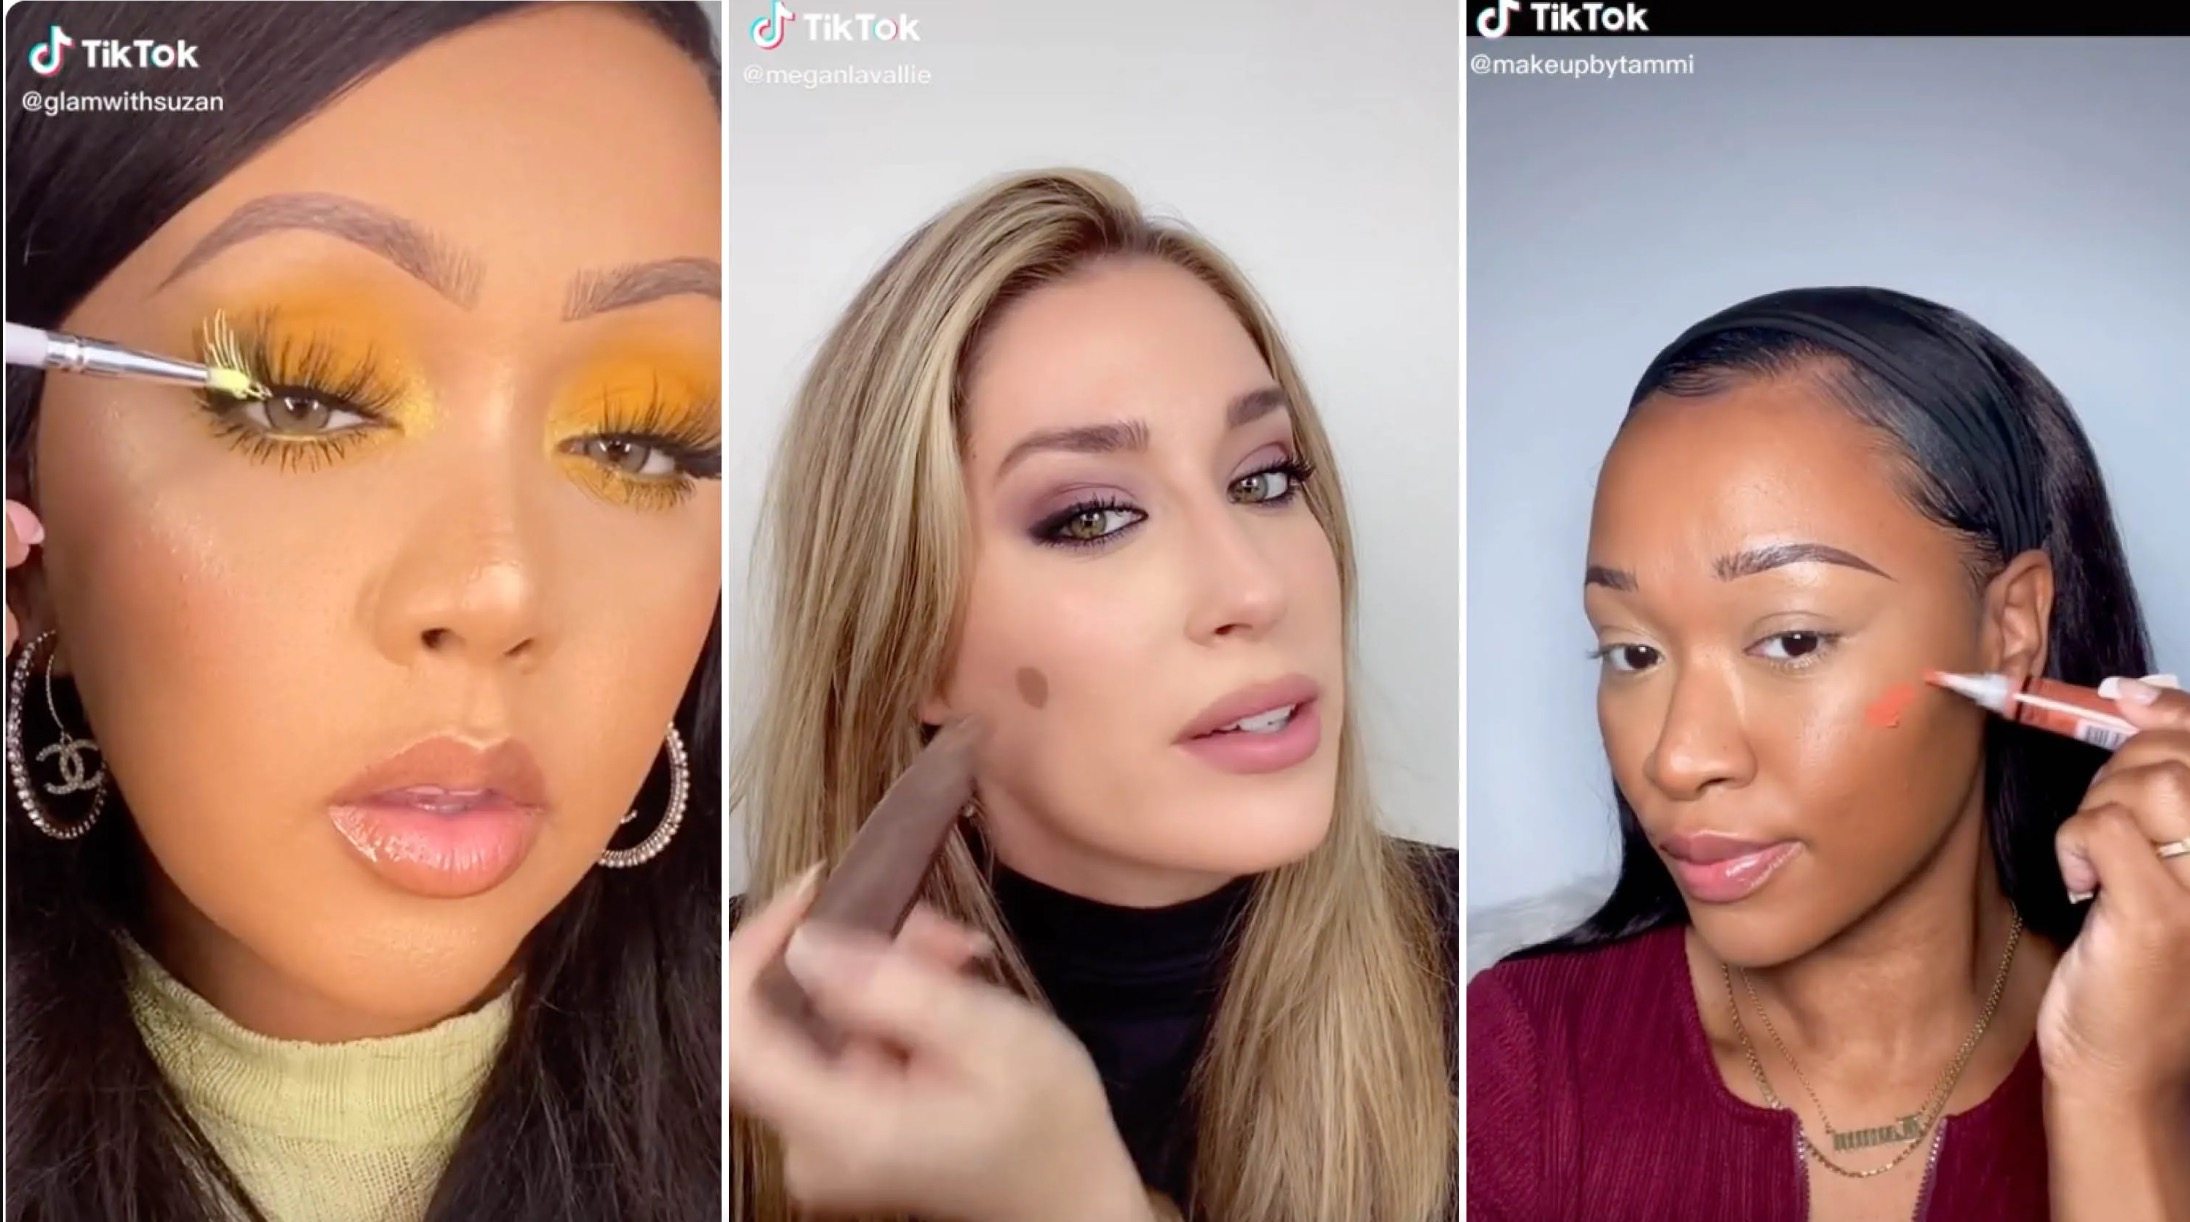 Stills from a series of TikTok videos of women using beauty products. Consumers, once sucked into the idea that eternal youth was theirs if they clicked the link promoted by an influencer, are waking up to the fact that they were being had. This includes de-influencers too. Photo: TikTok